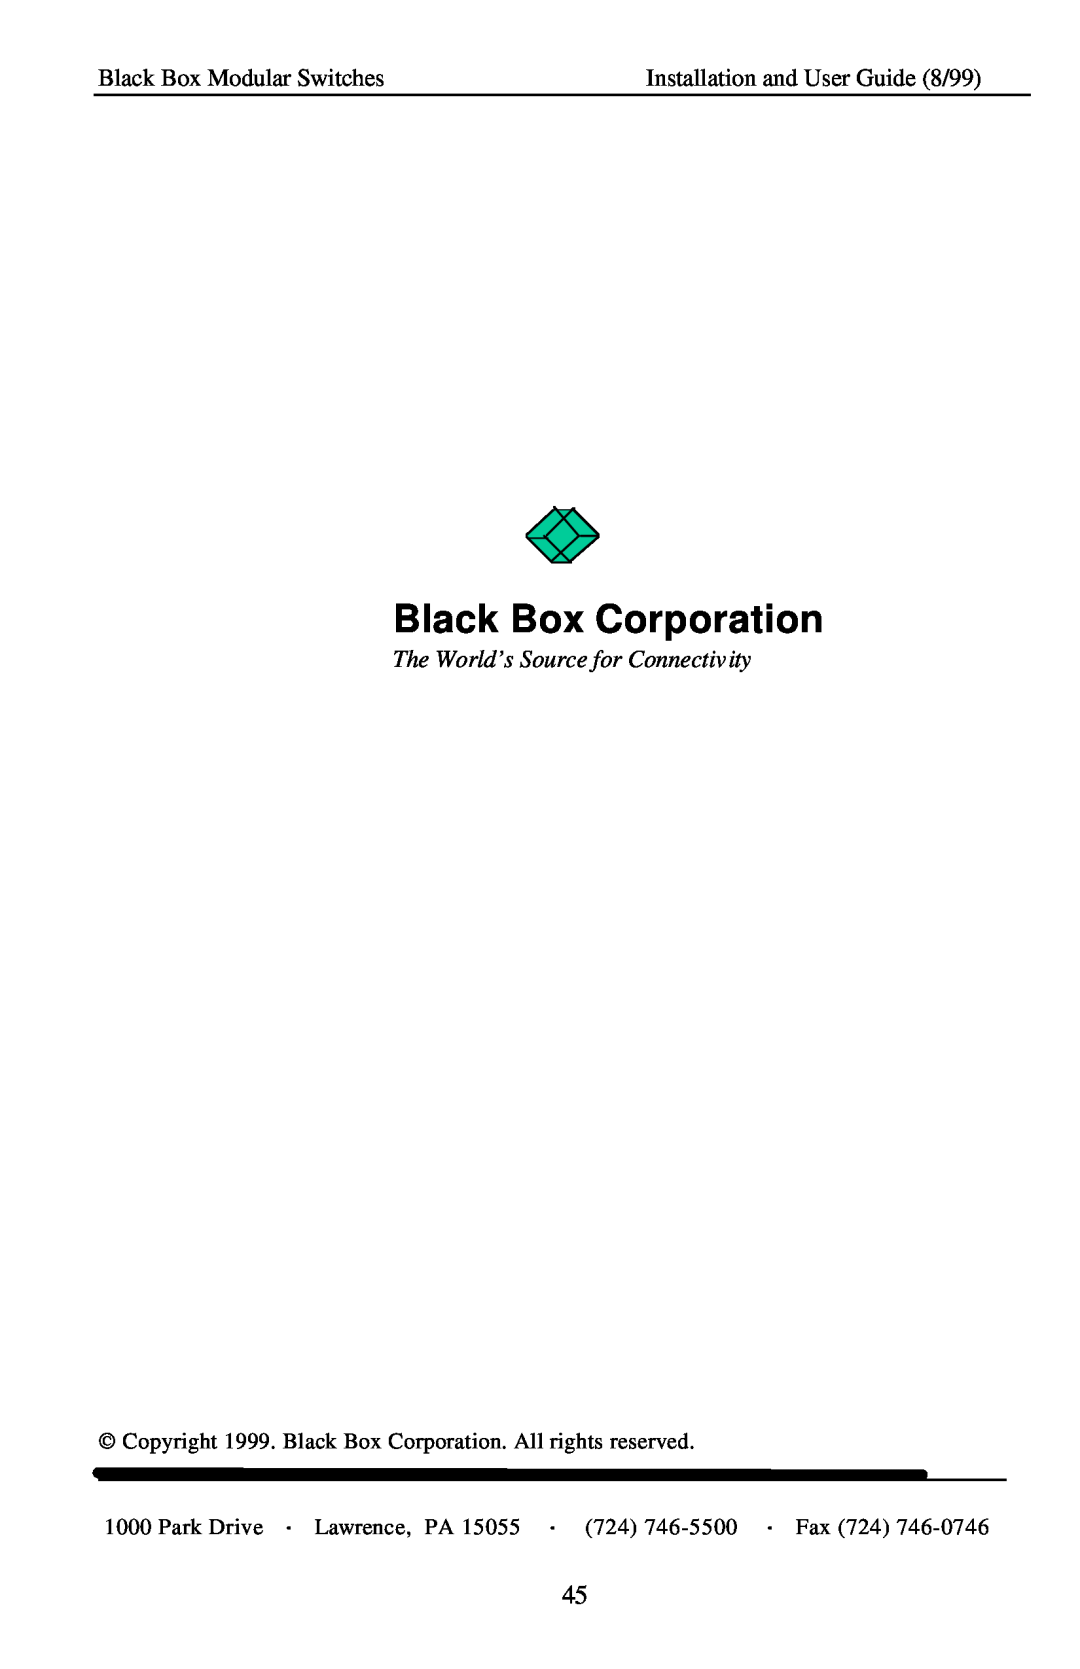 Black Box LE14XXA, Modular Switches manual Black Box Corporation, The World’s Source for Connectivity 